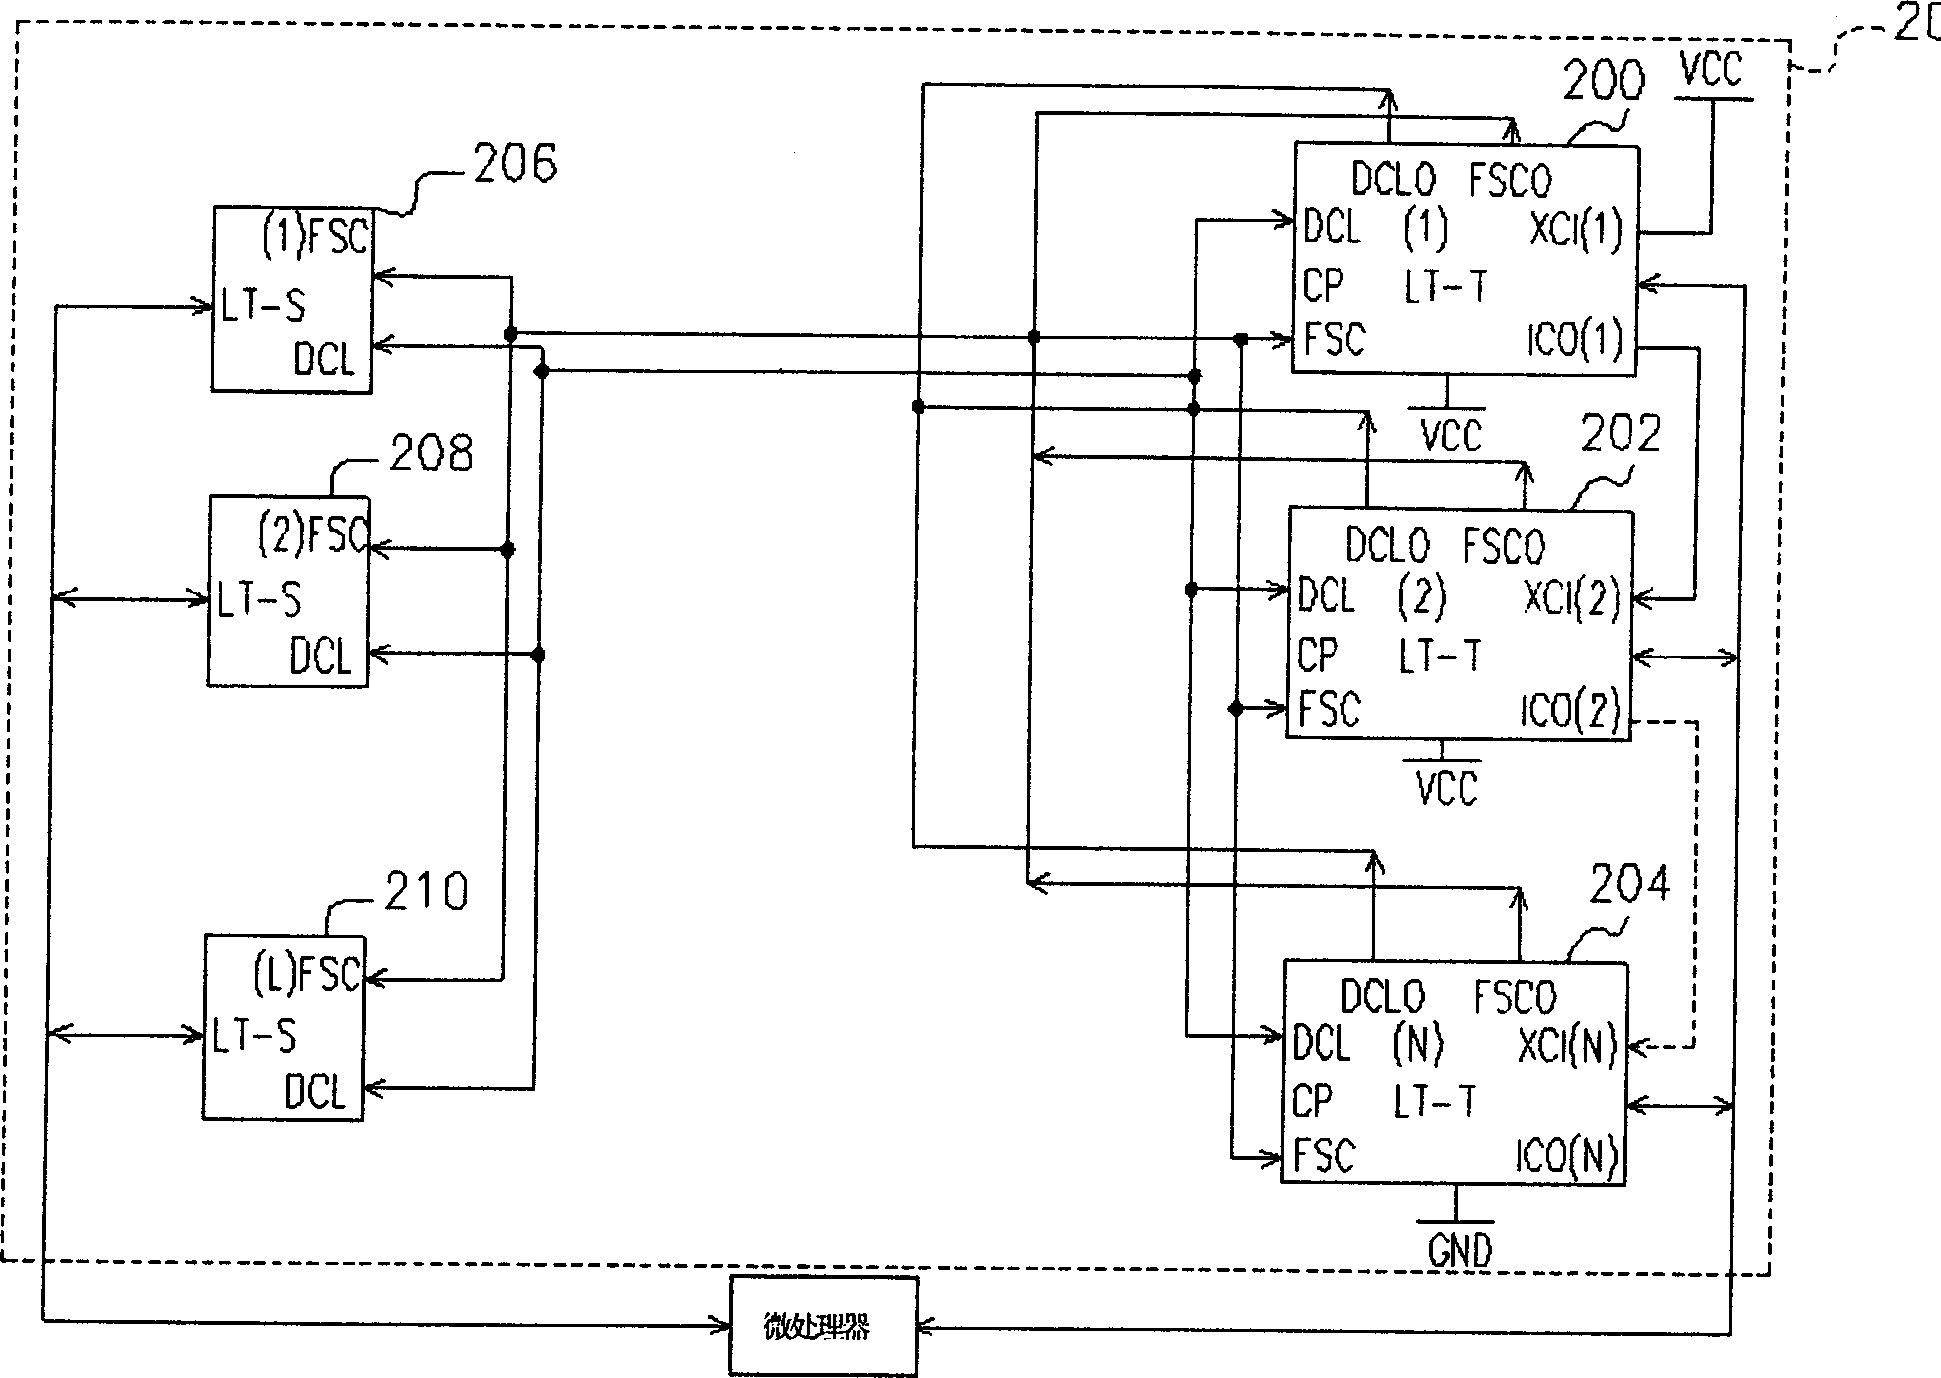 Special small ISON exchange selecting synchronous pulse source automatically